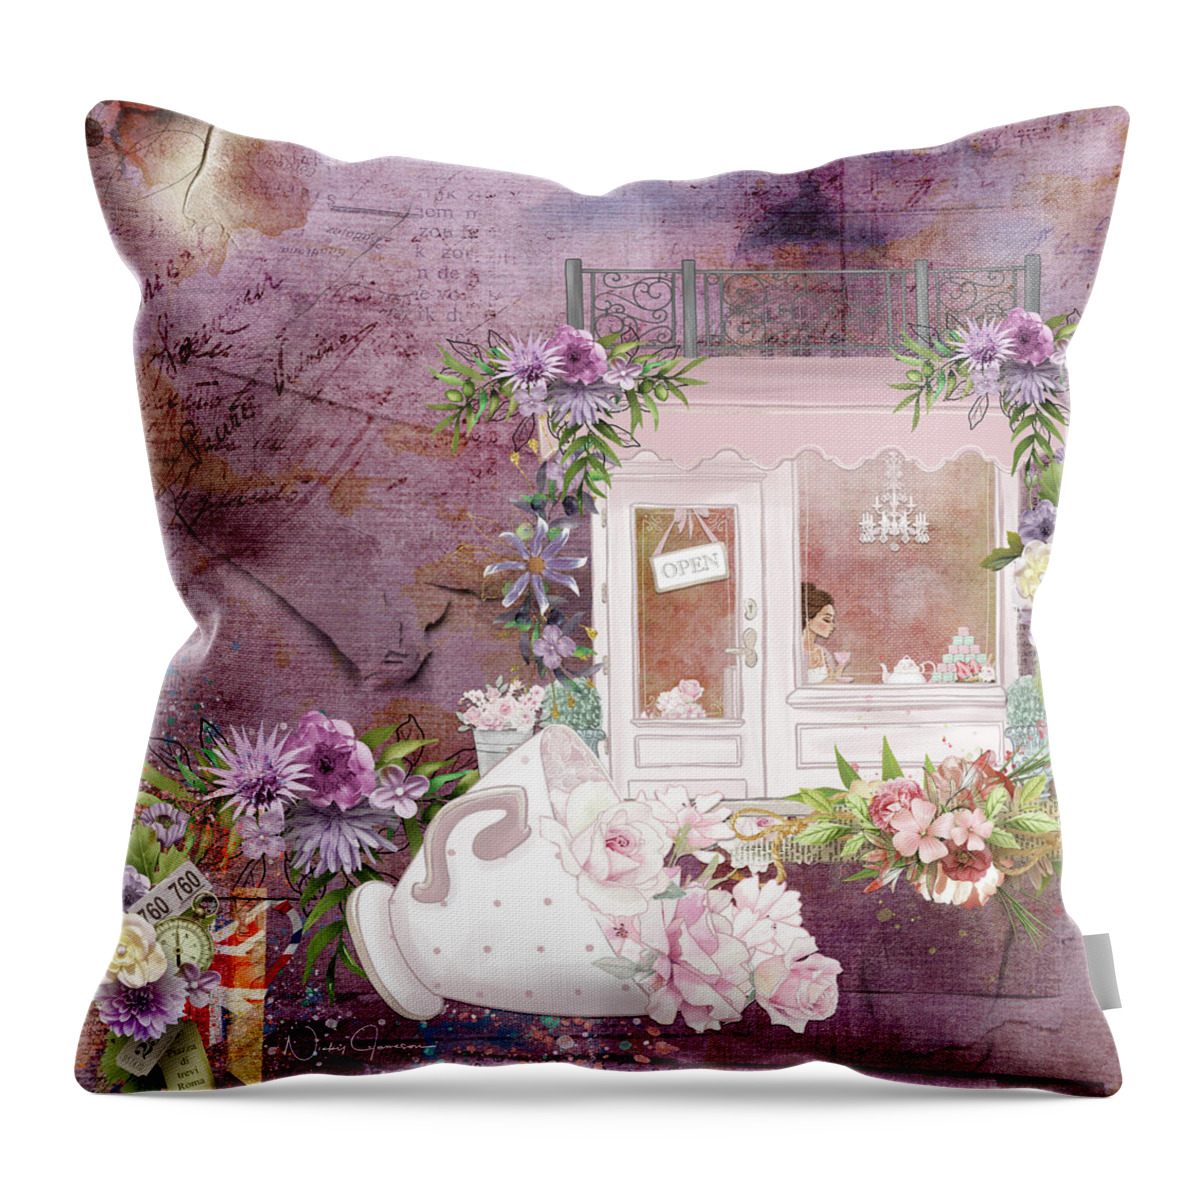 Nickyjameson Throw Pillow featuring the mixed media Tea Shop Times by Nicky Jameson